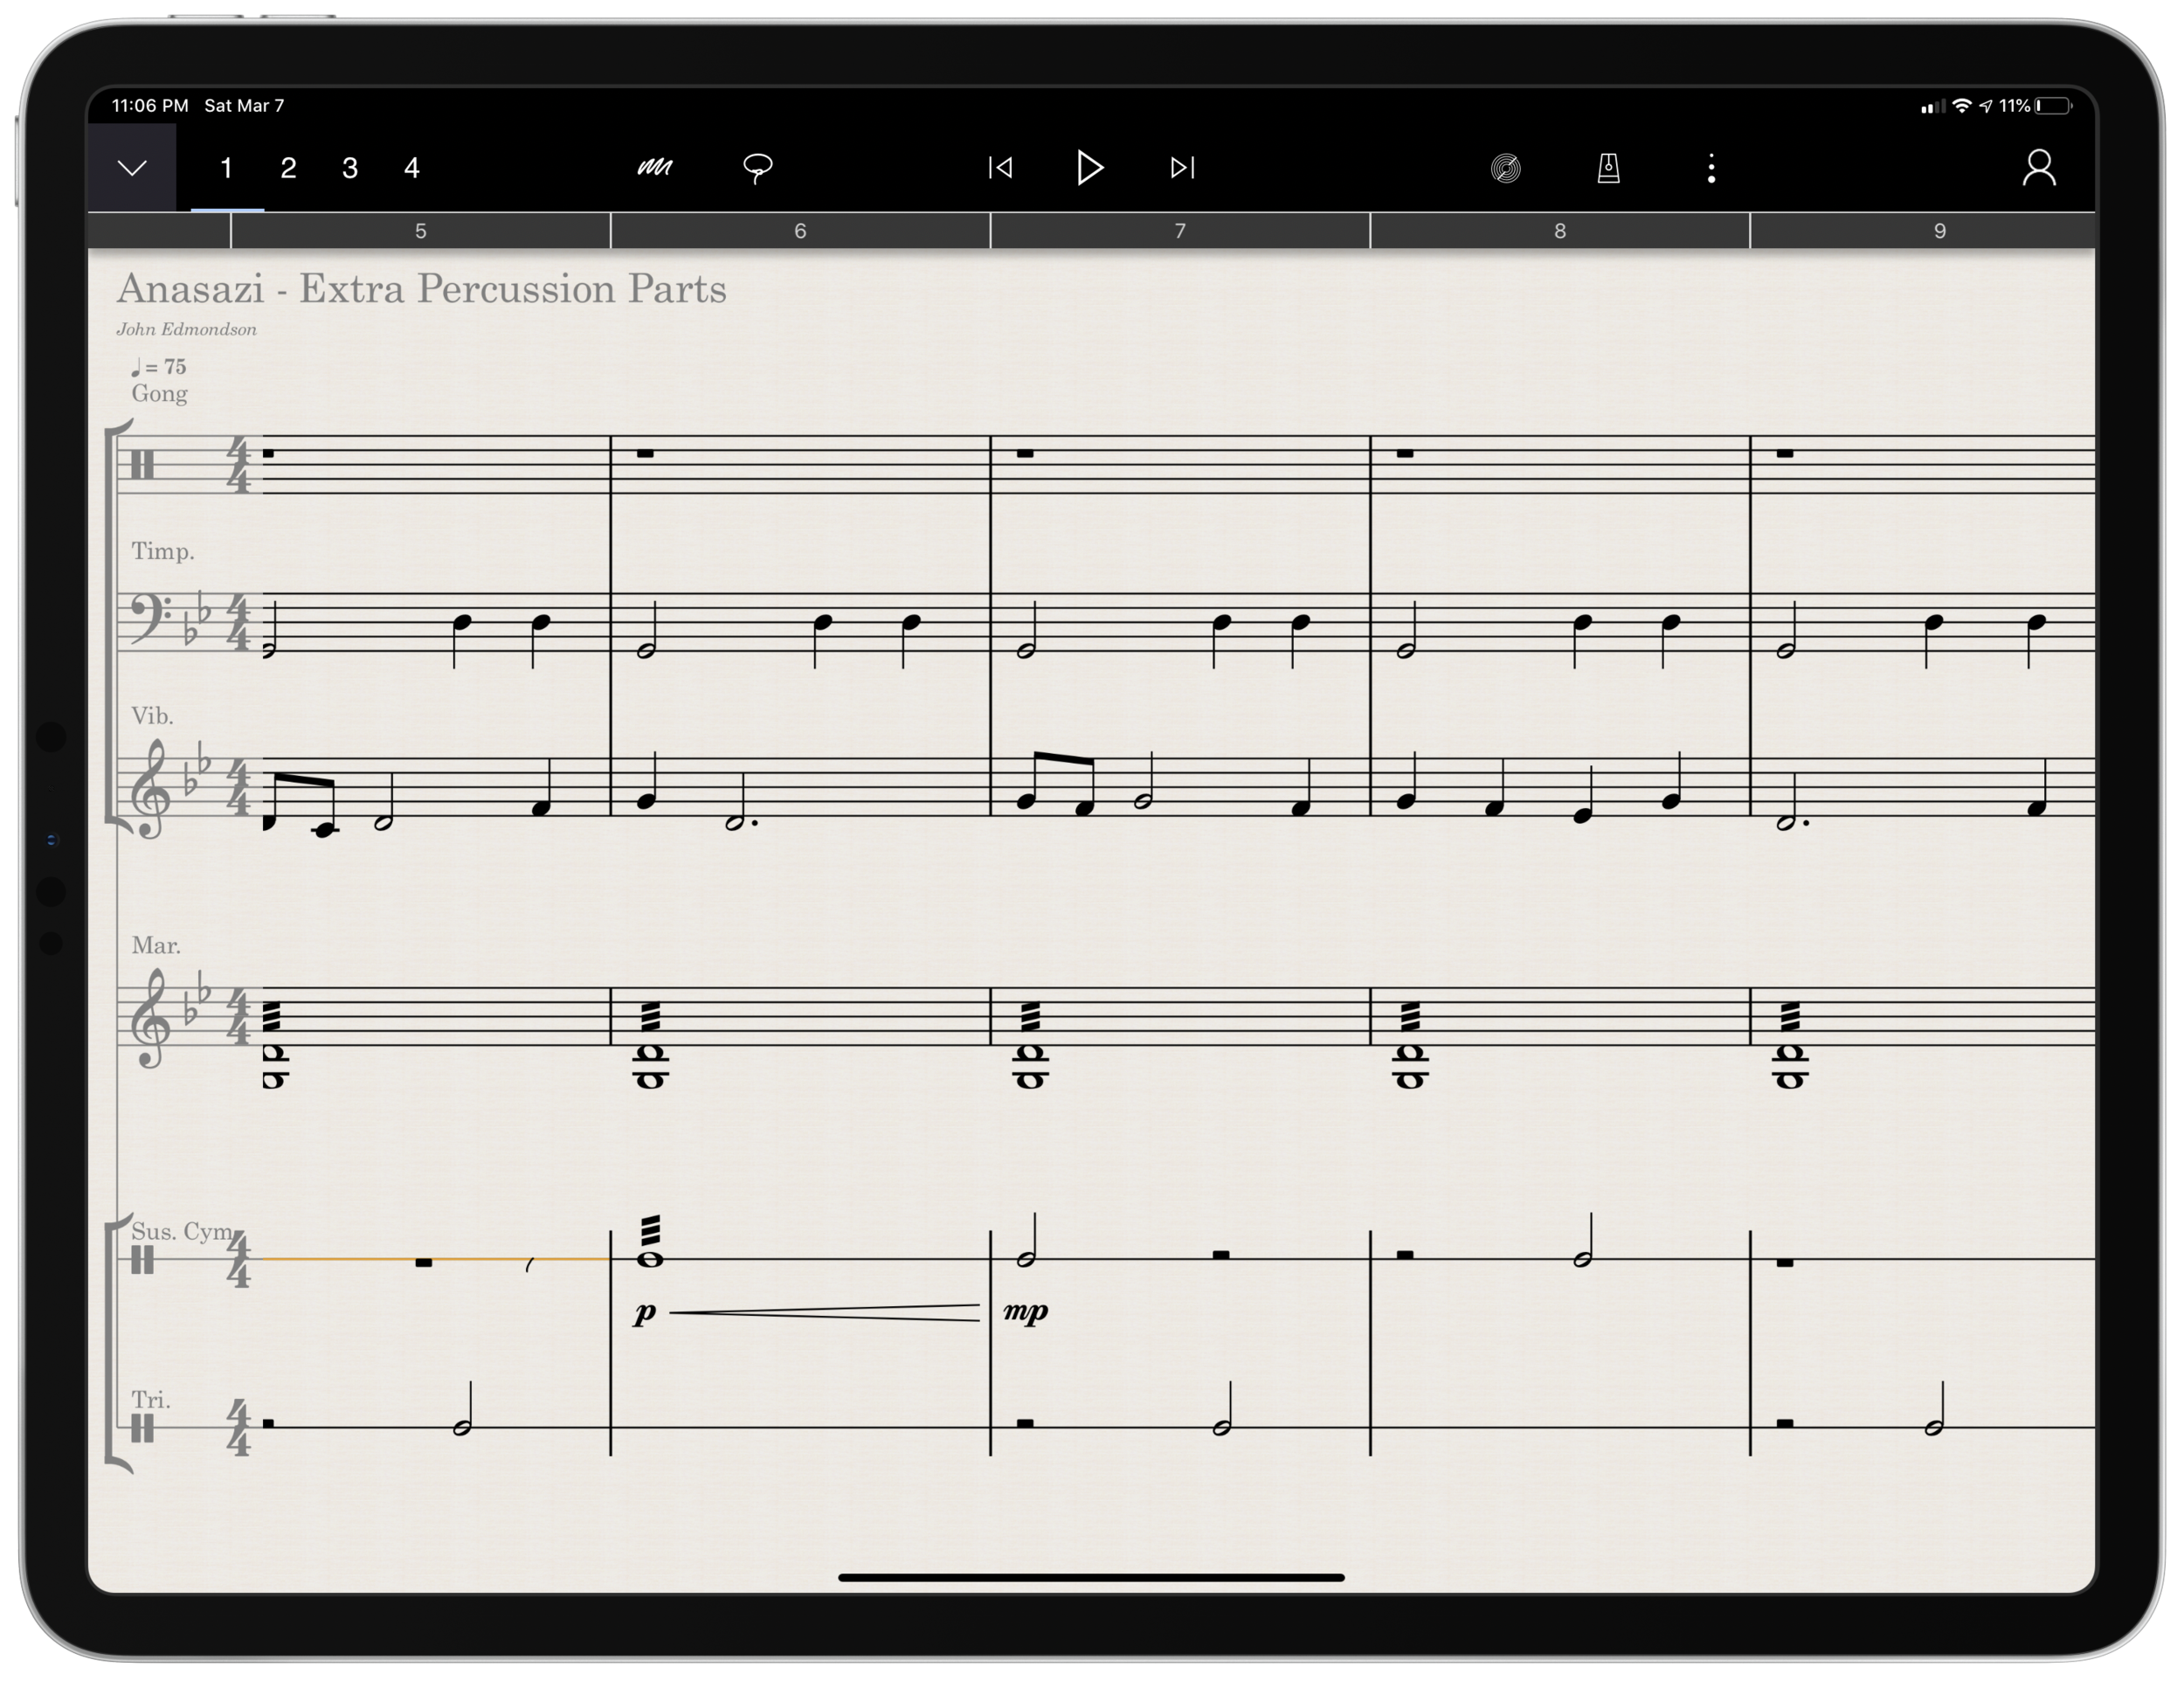 An interview with PlayScore creator Anthony Wilkes – Dorico